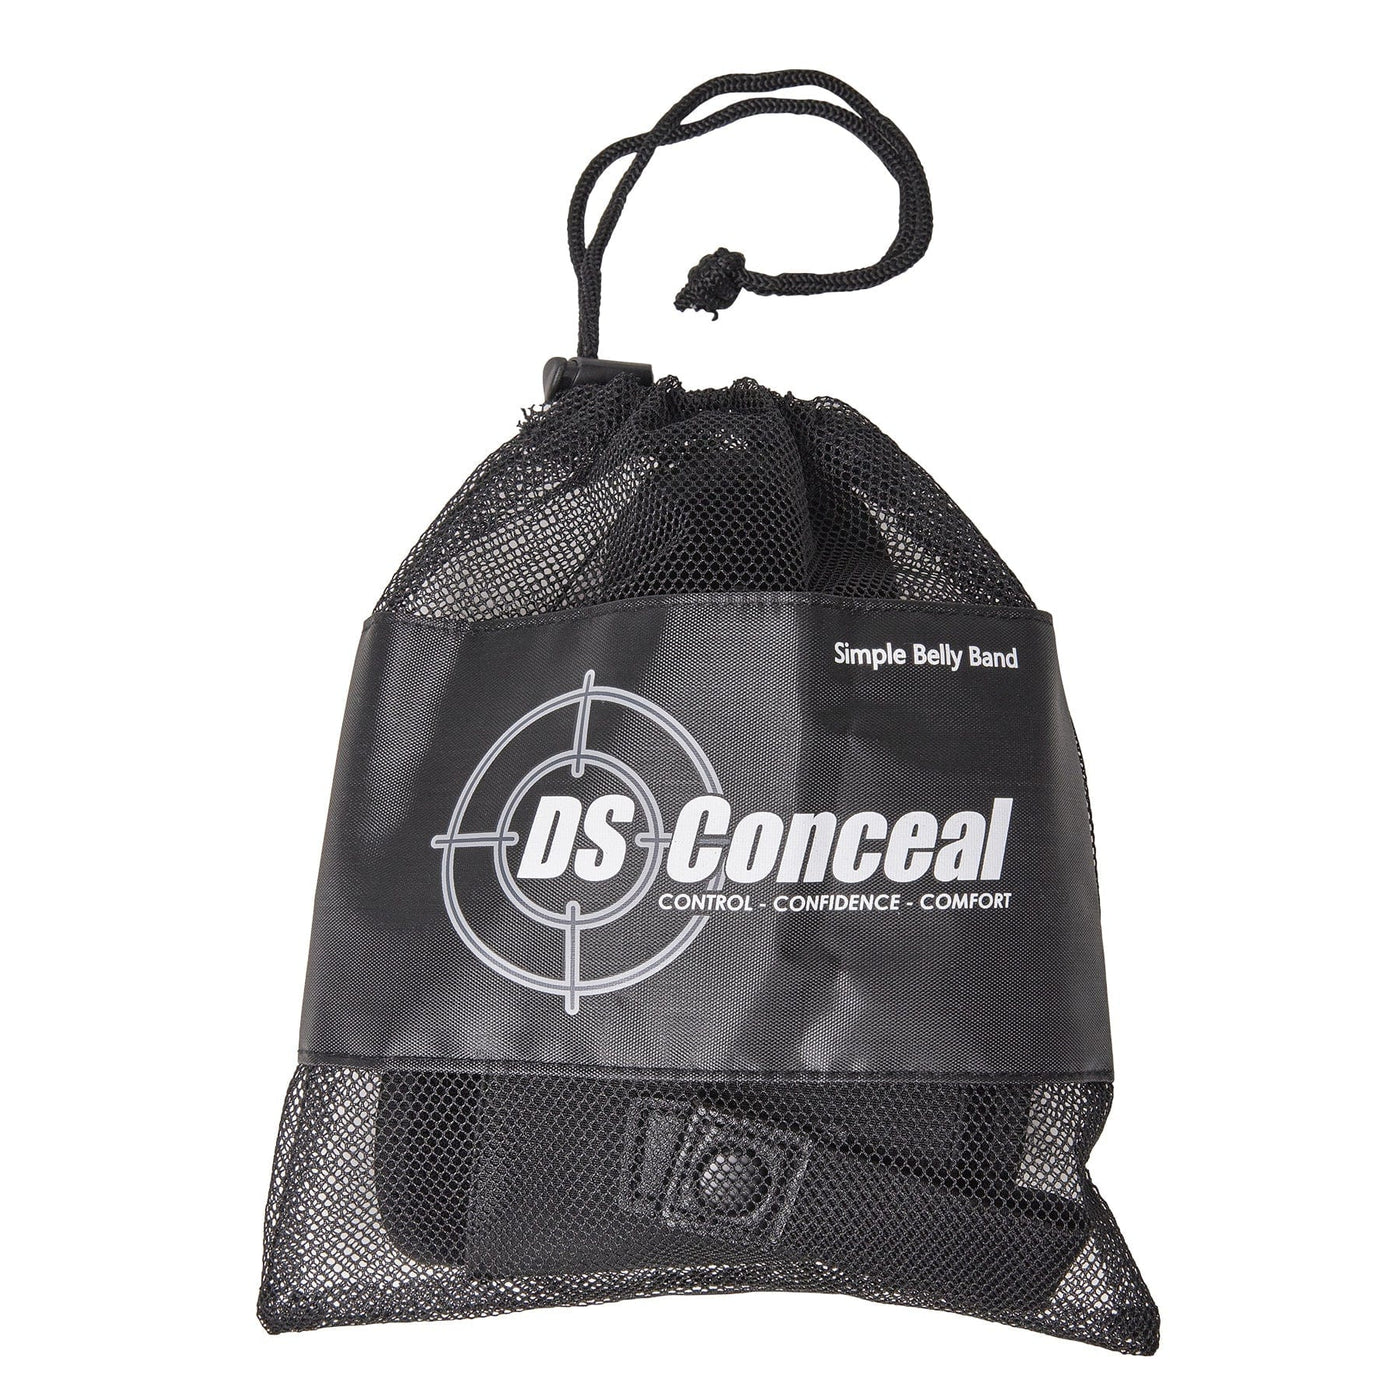 Unisex Simple Belly Band by DS Conceal